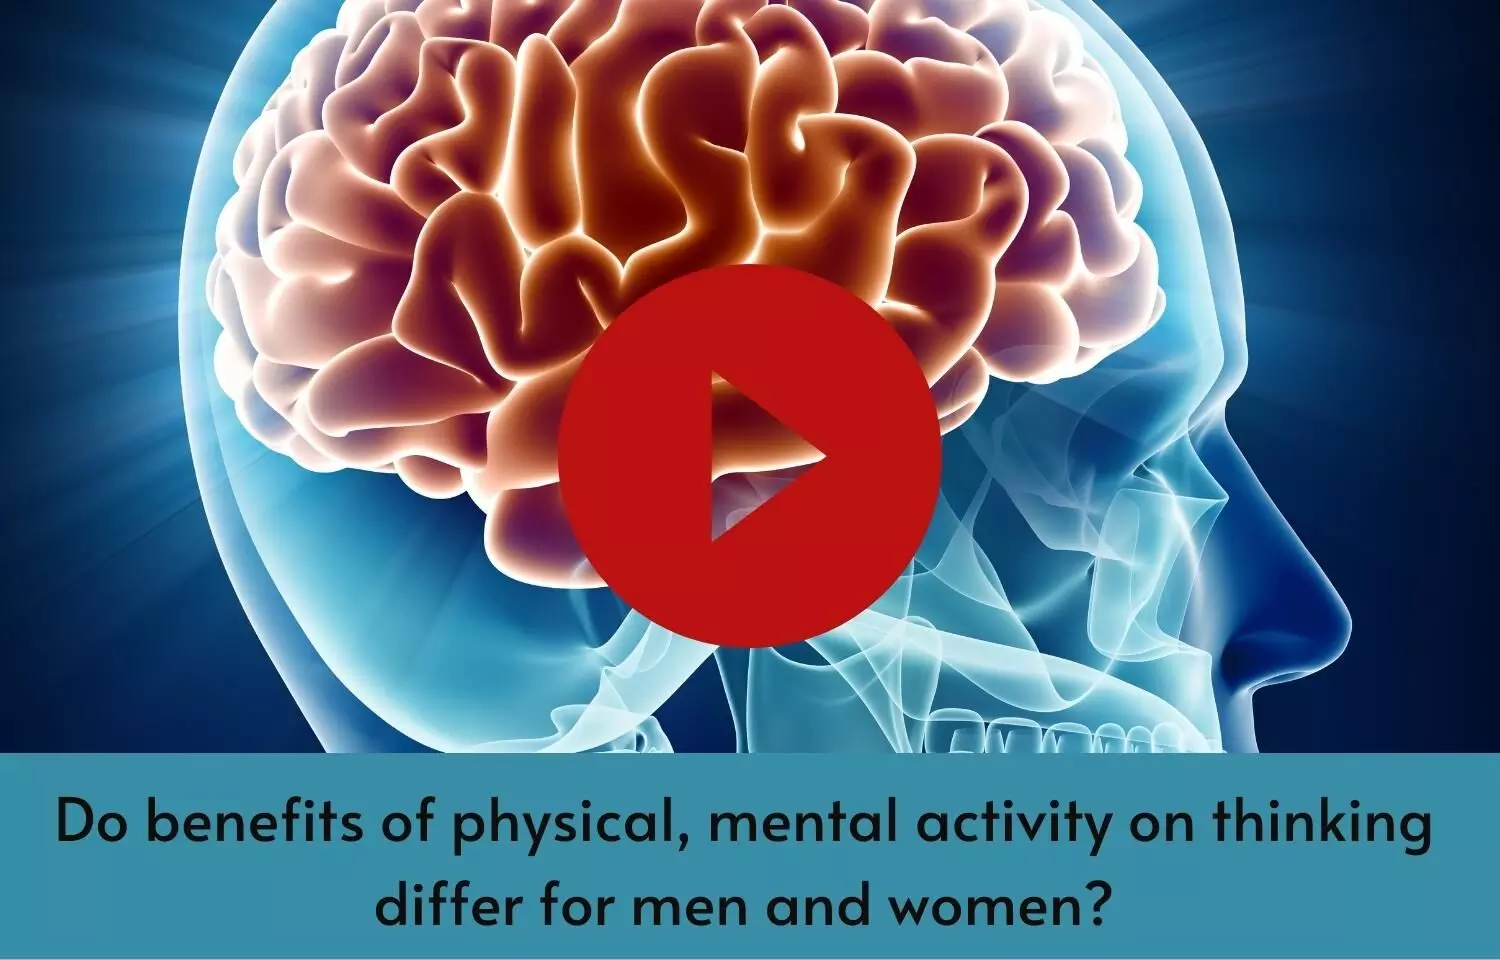 Do benefits of physical, mental activity on thinking differ for men and women?